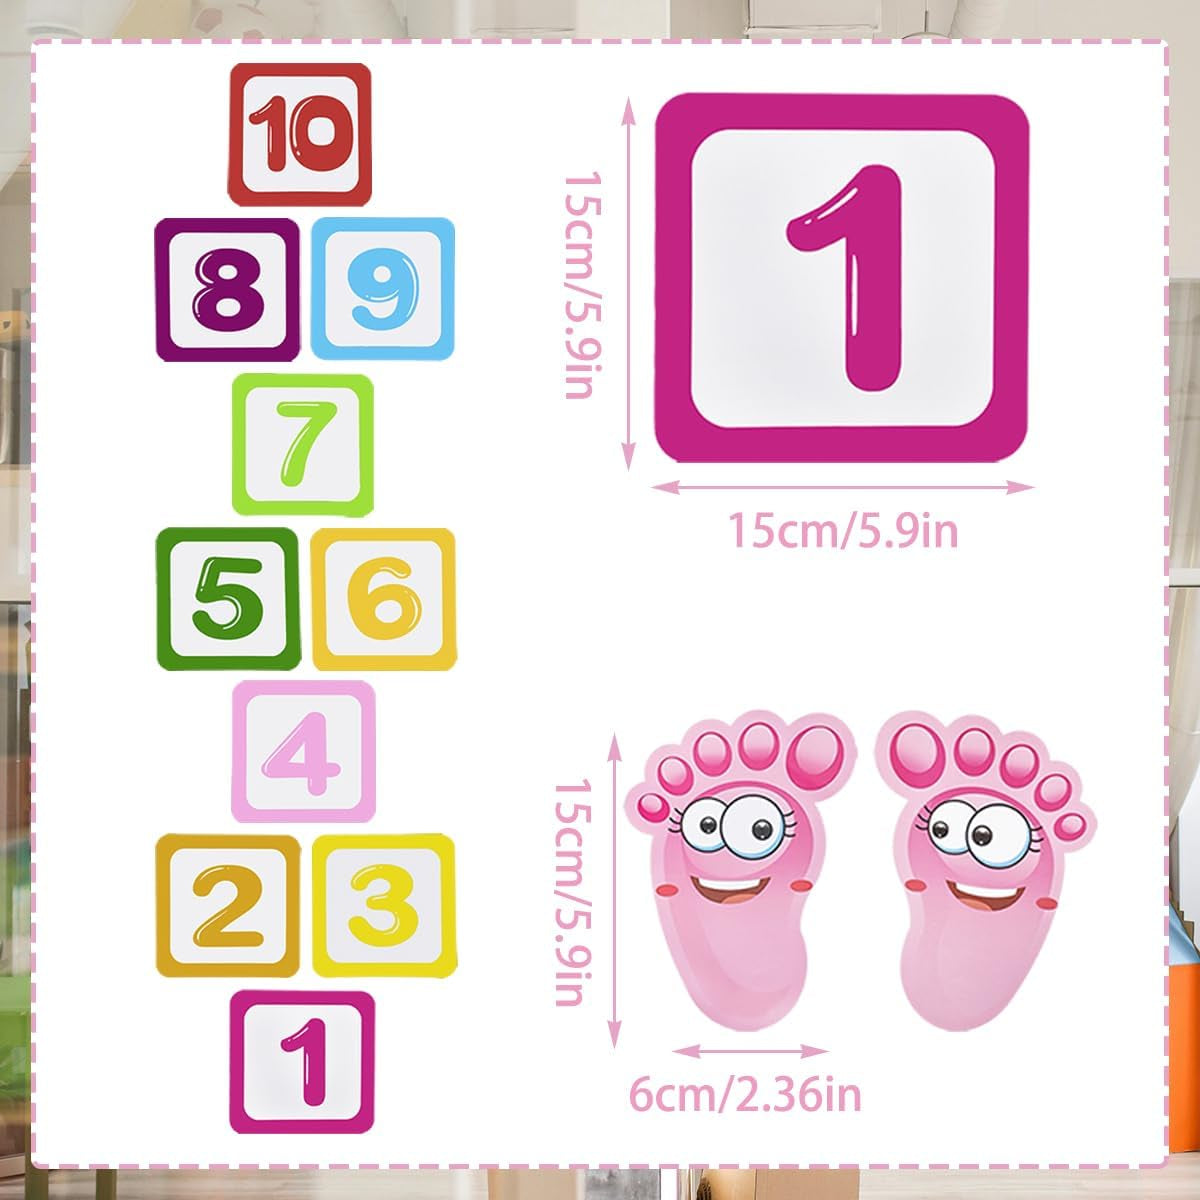 10 PCS Number Lattice Floor Sticker with 1 Pair Kids Footprint Stickers, Funny Number Hopscotch Game Floor Stickers Wall Decals for Classroom Bedroom Living Room Ground Corridor Nursery